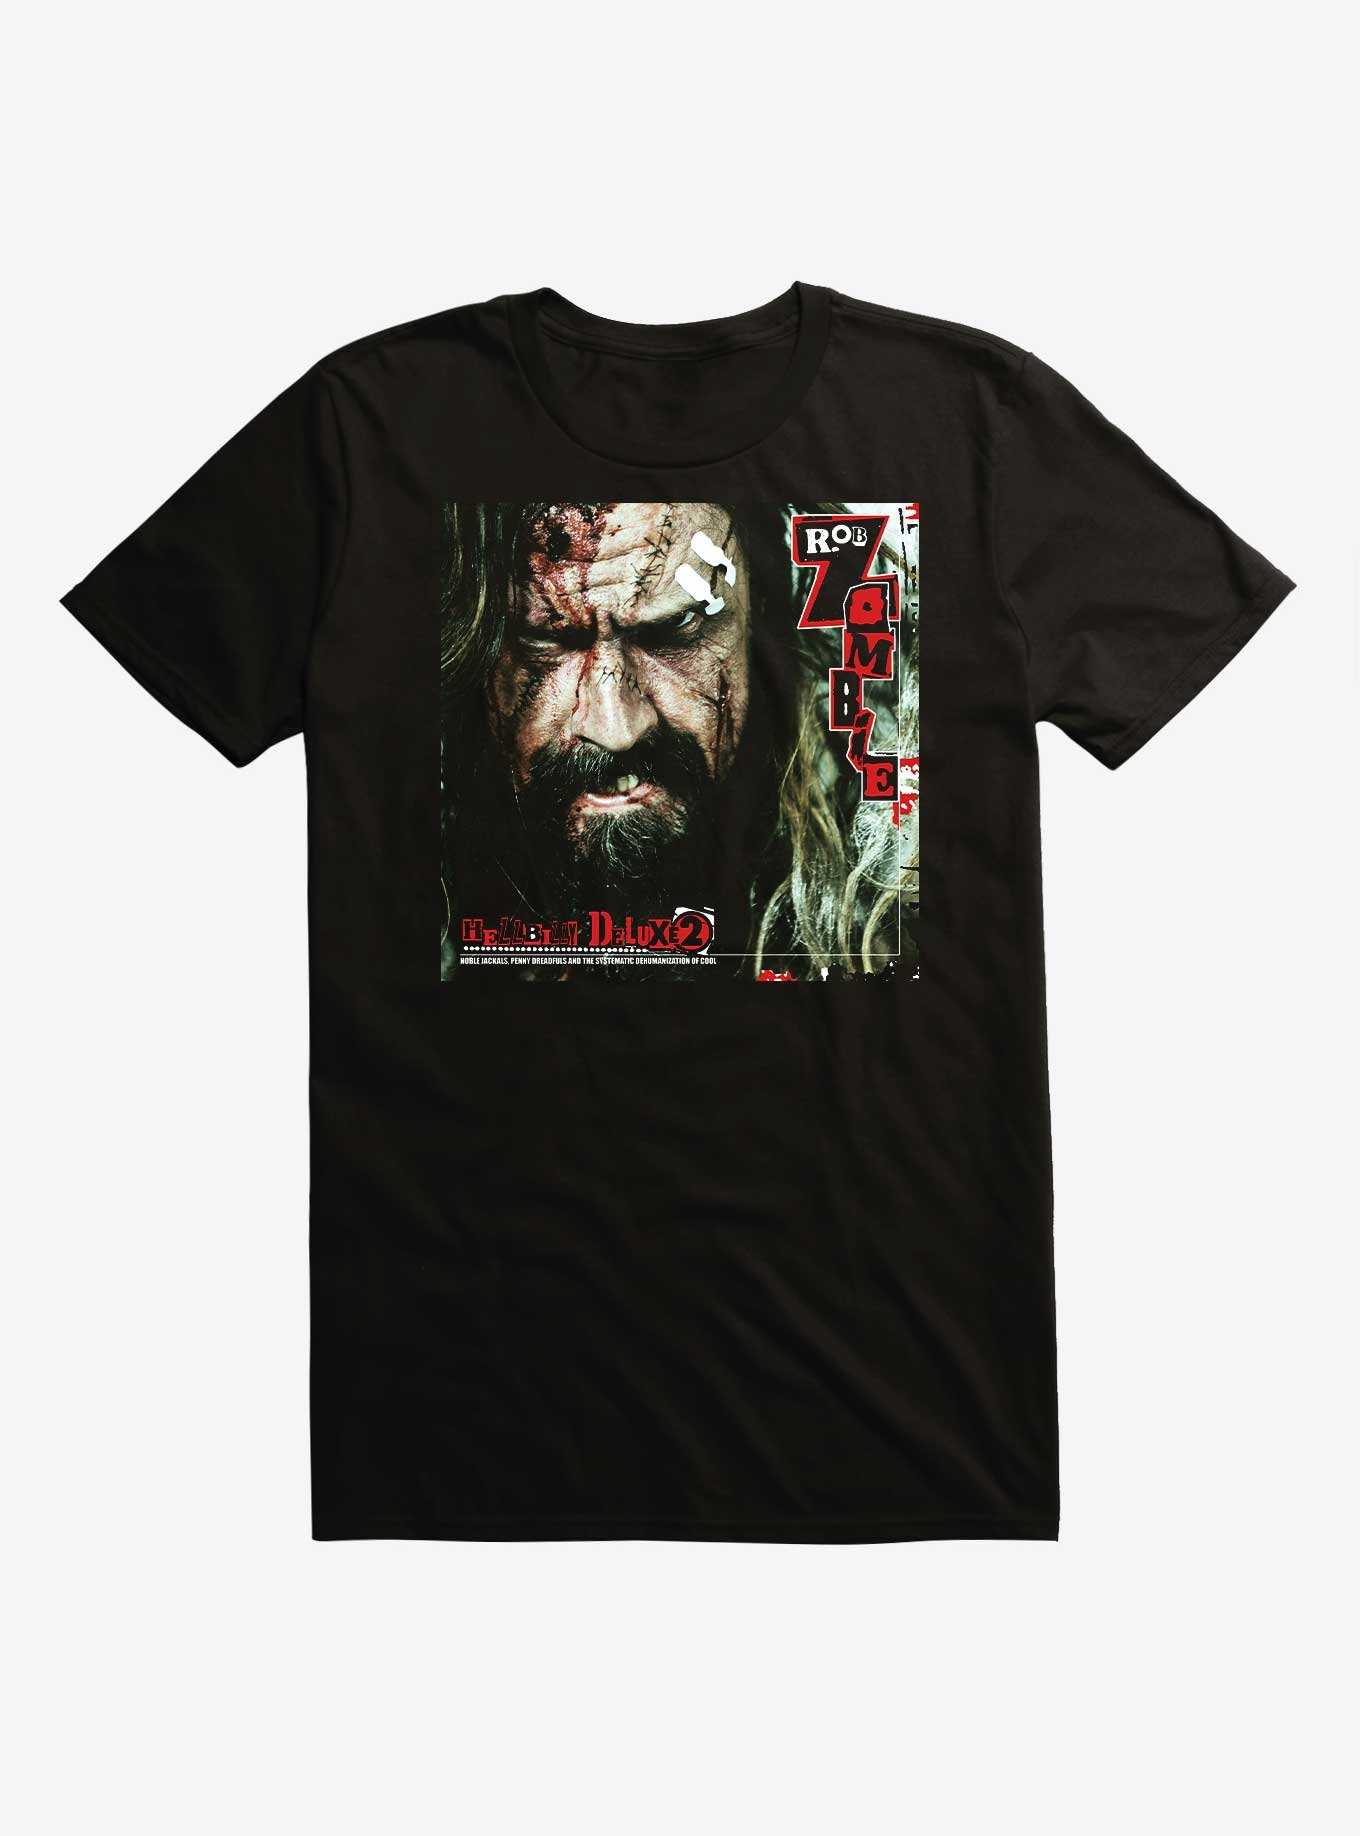 Rob Zombie Hellbilly Deluxe 2 T-Shirt, , hi-res